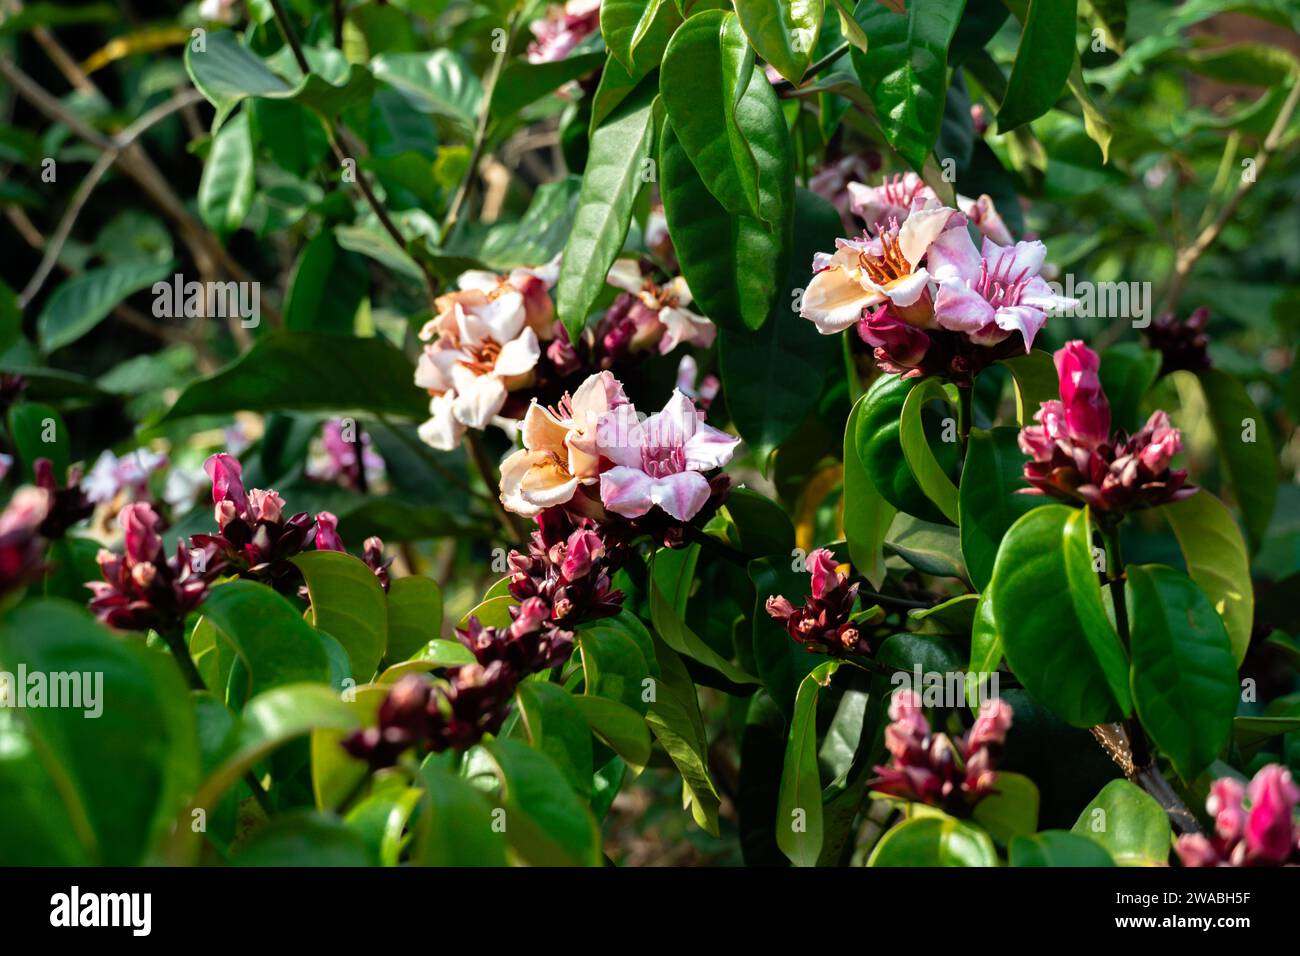 Pale pink and deep red flower of Strophanthus gratus, known as Climbing-oleander, Poison arrowvine, Spider-tresses, Ouabain or Strophantus, in front o Stock Photo